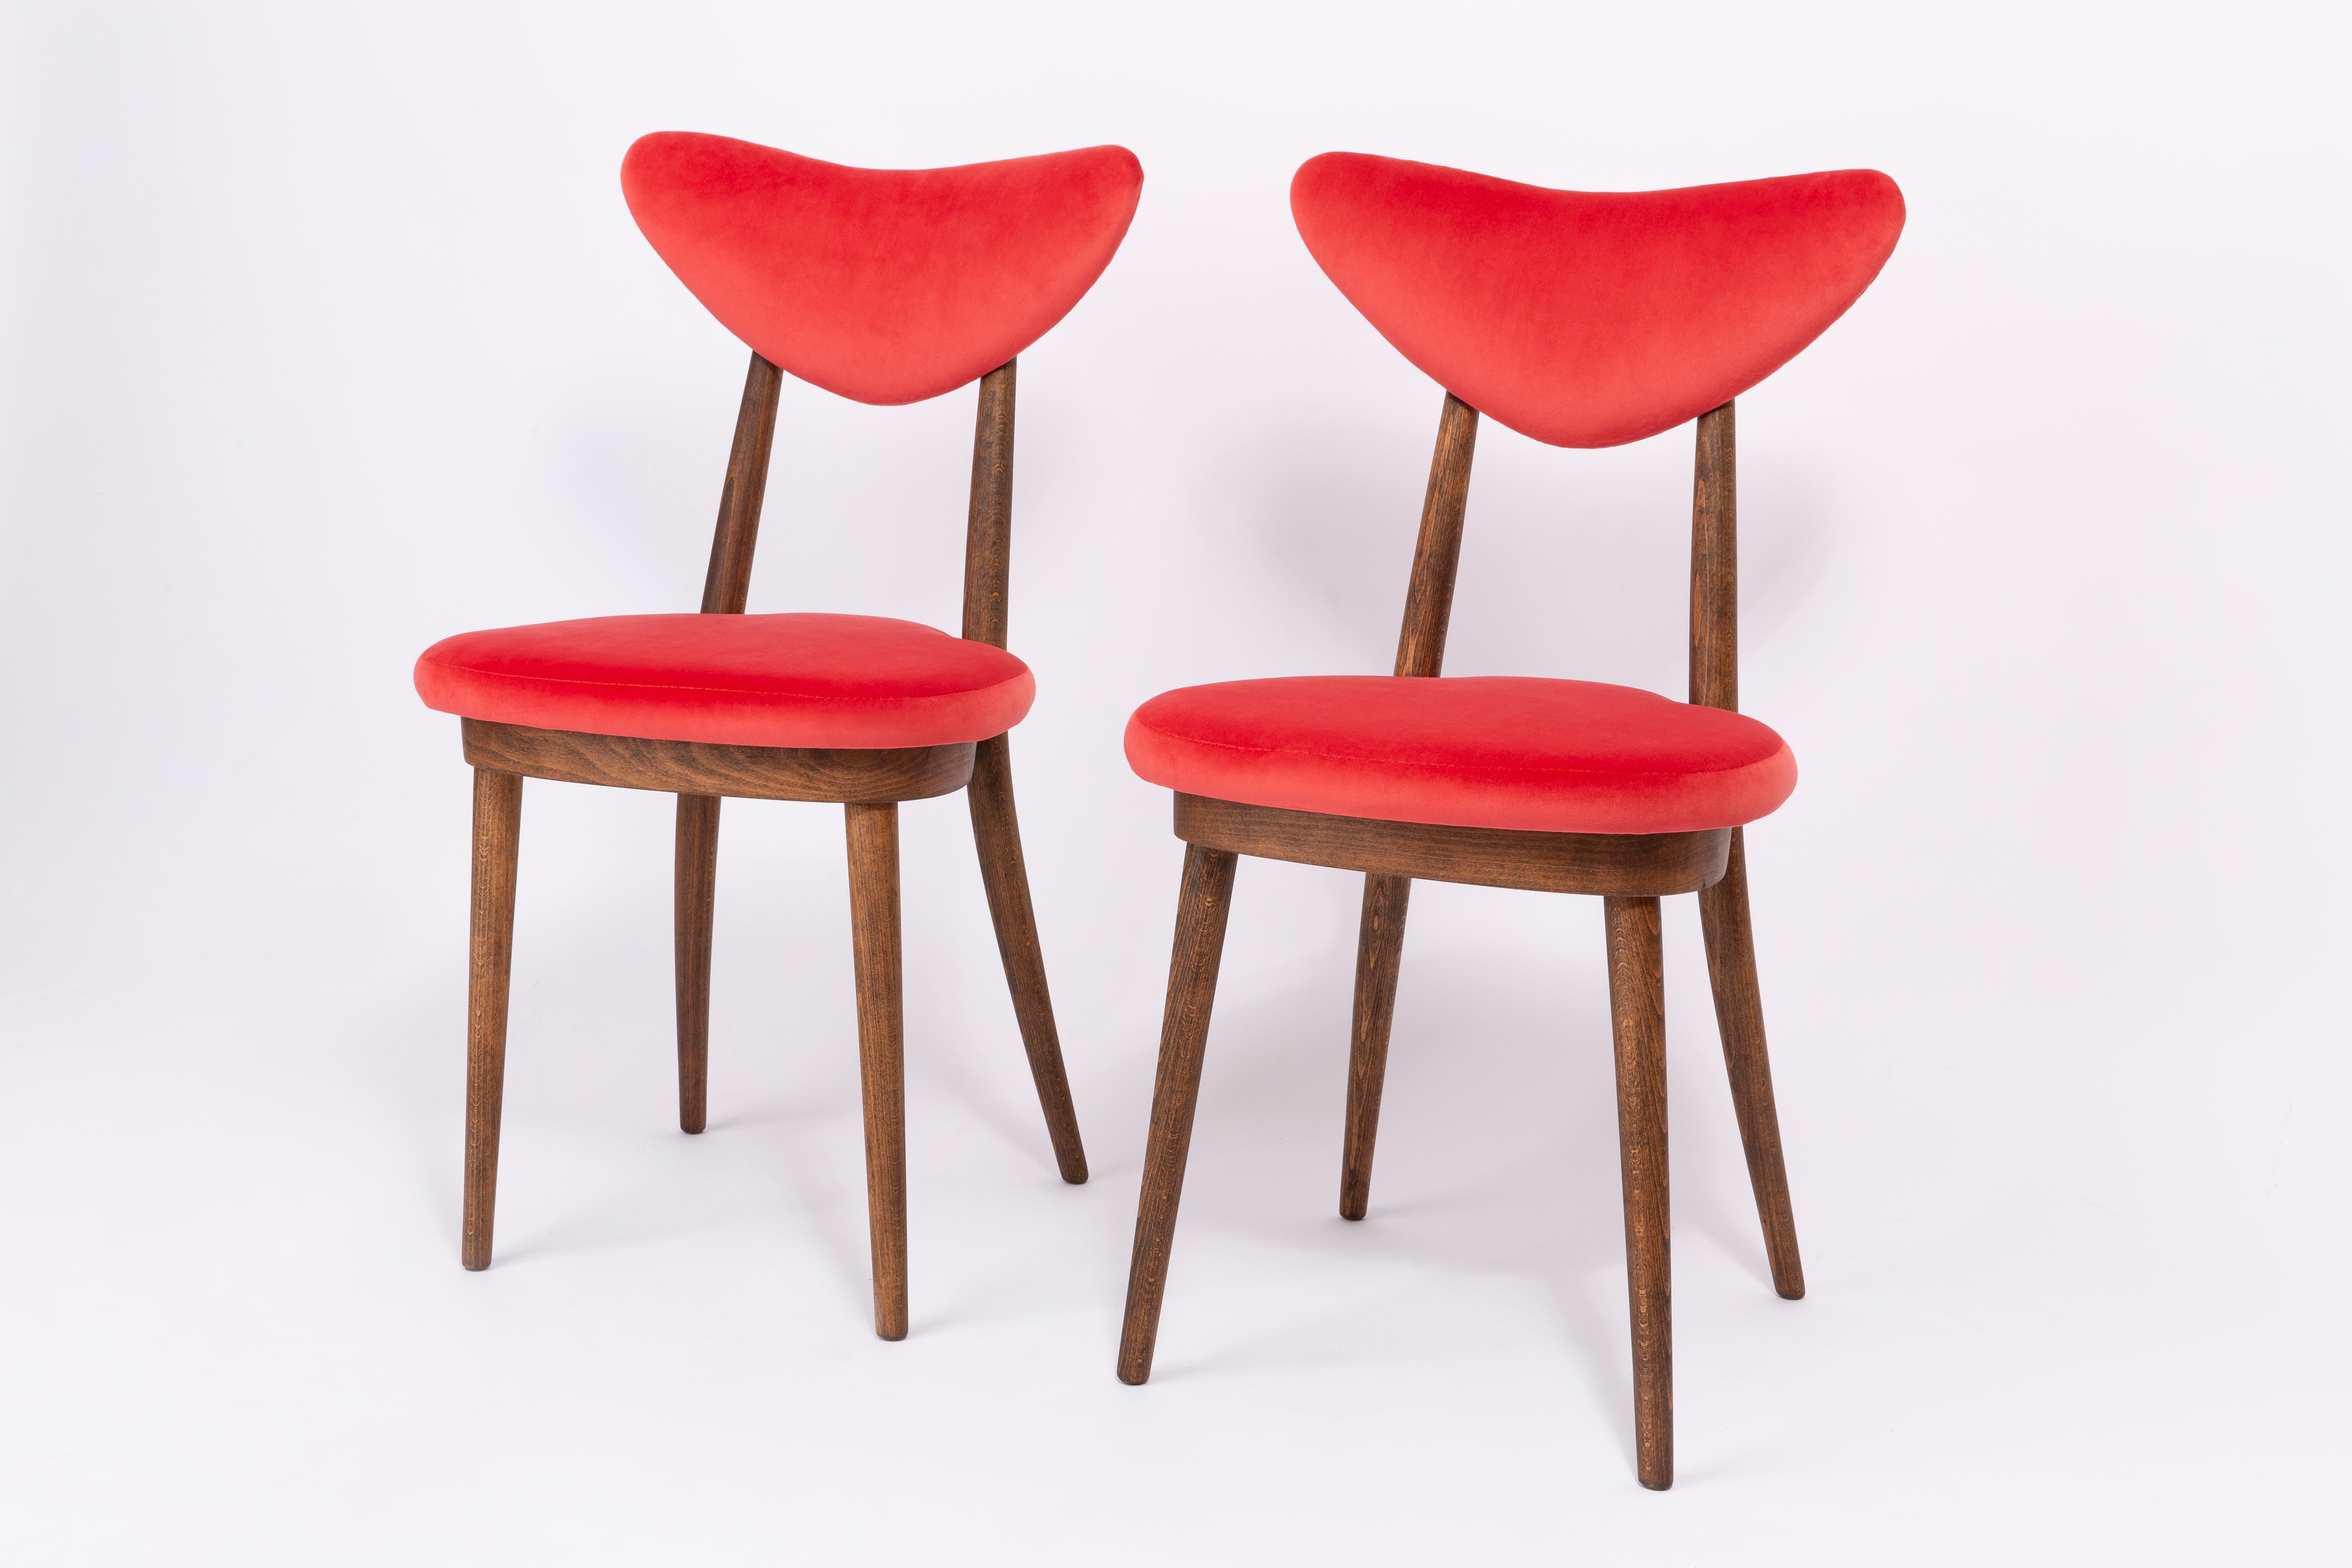 Polish Set of Two Red Heart Chairs, Poland, 1960s For Sale